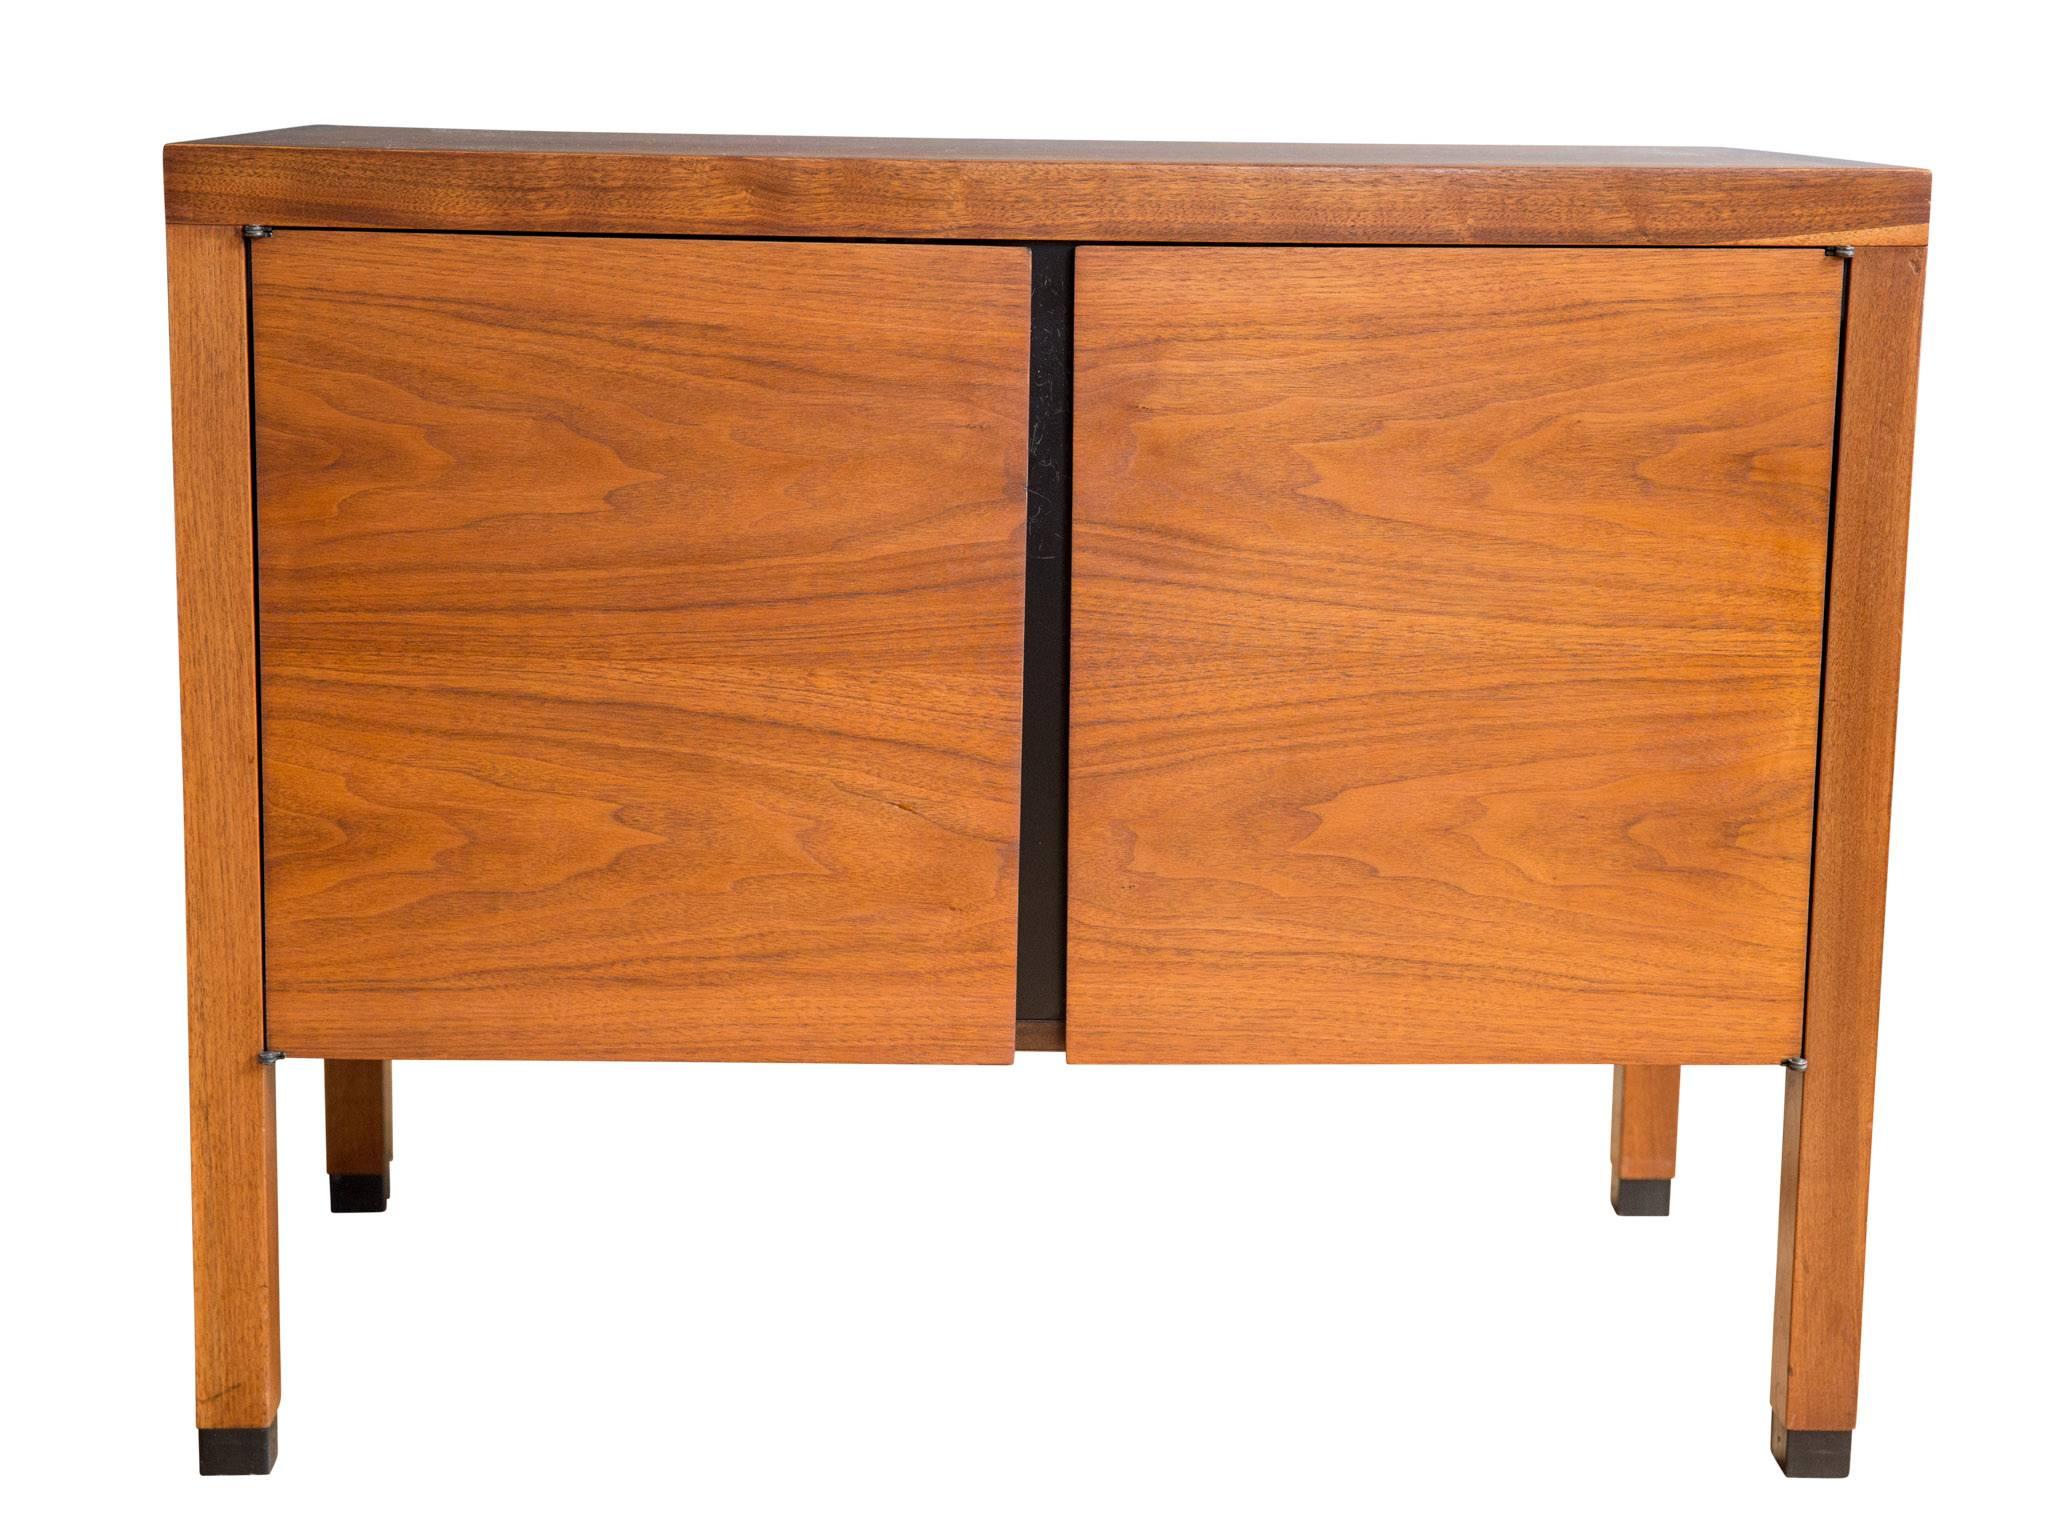 A quietly elegant walnut cabinet attributed to Paul McCobb for Directional Furniture, circa 1960s. Featuring two doors with recessed pulls that open to reveal adjustable shelving. Carefully matched graining, handsome capped legs, and a finished back